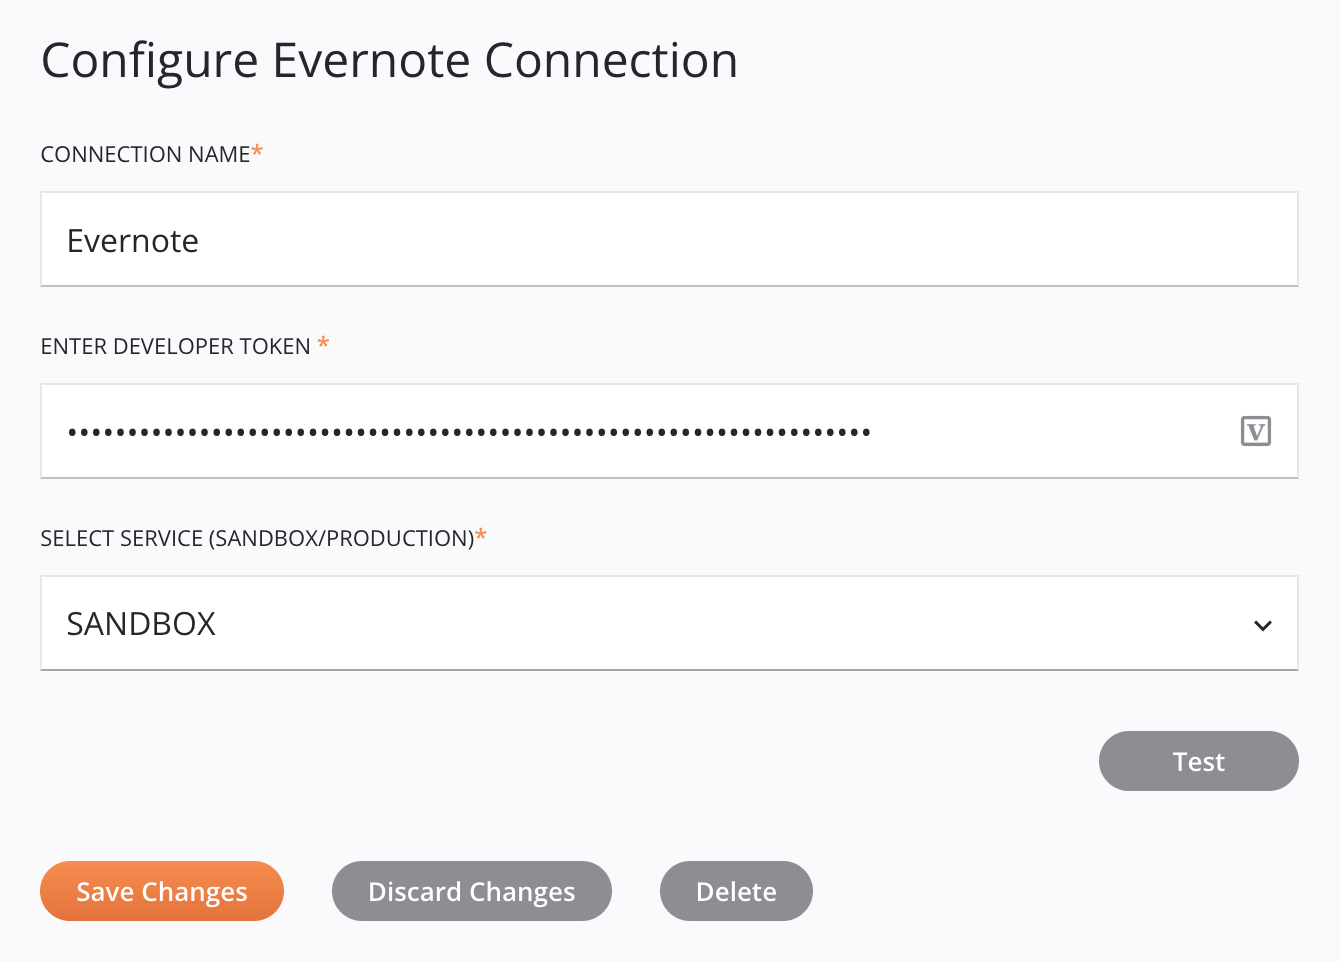 Evernote connection configuration